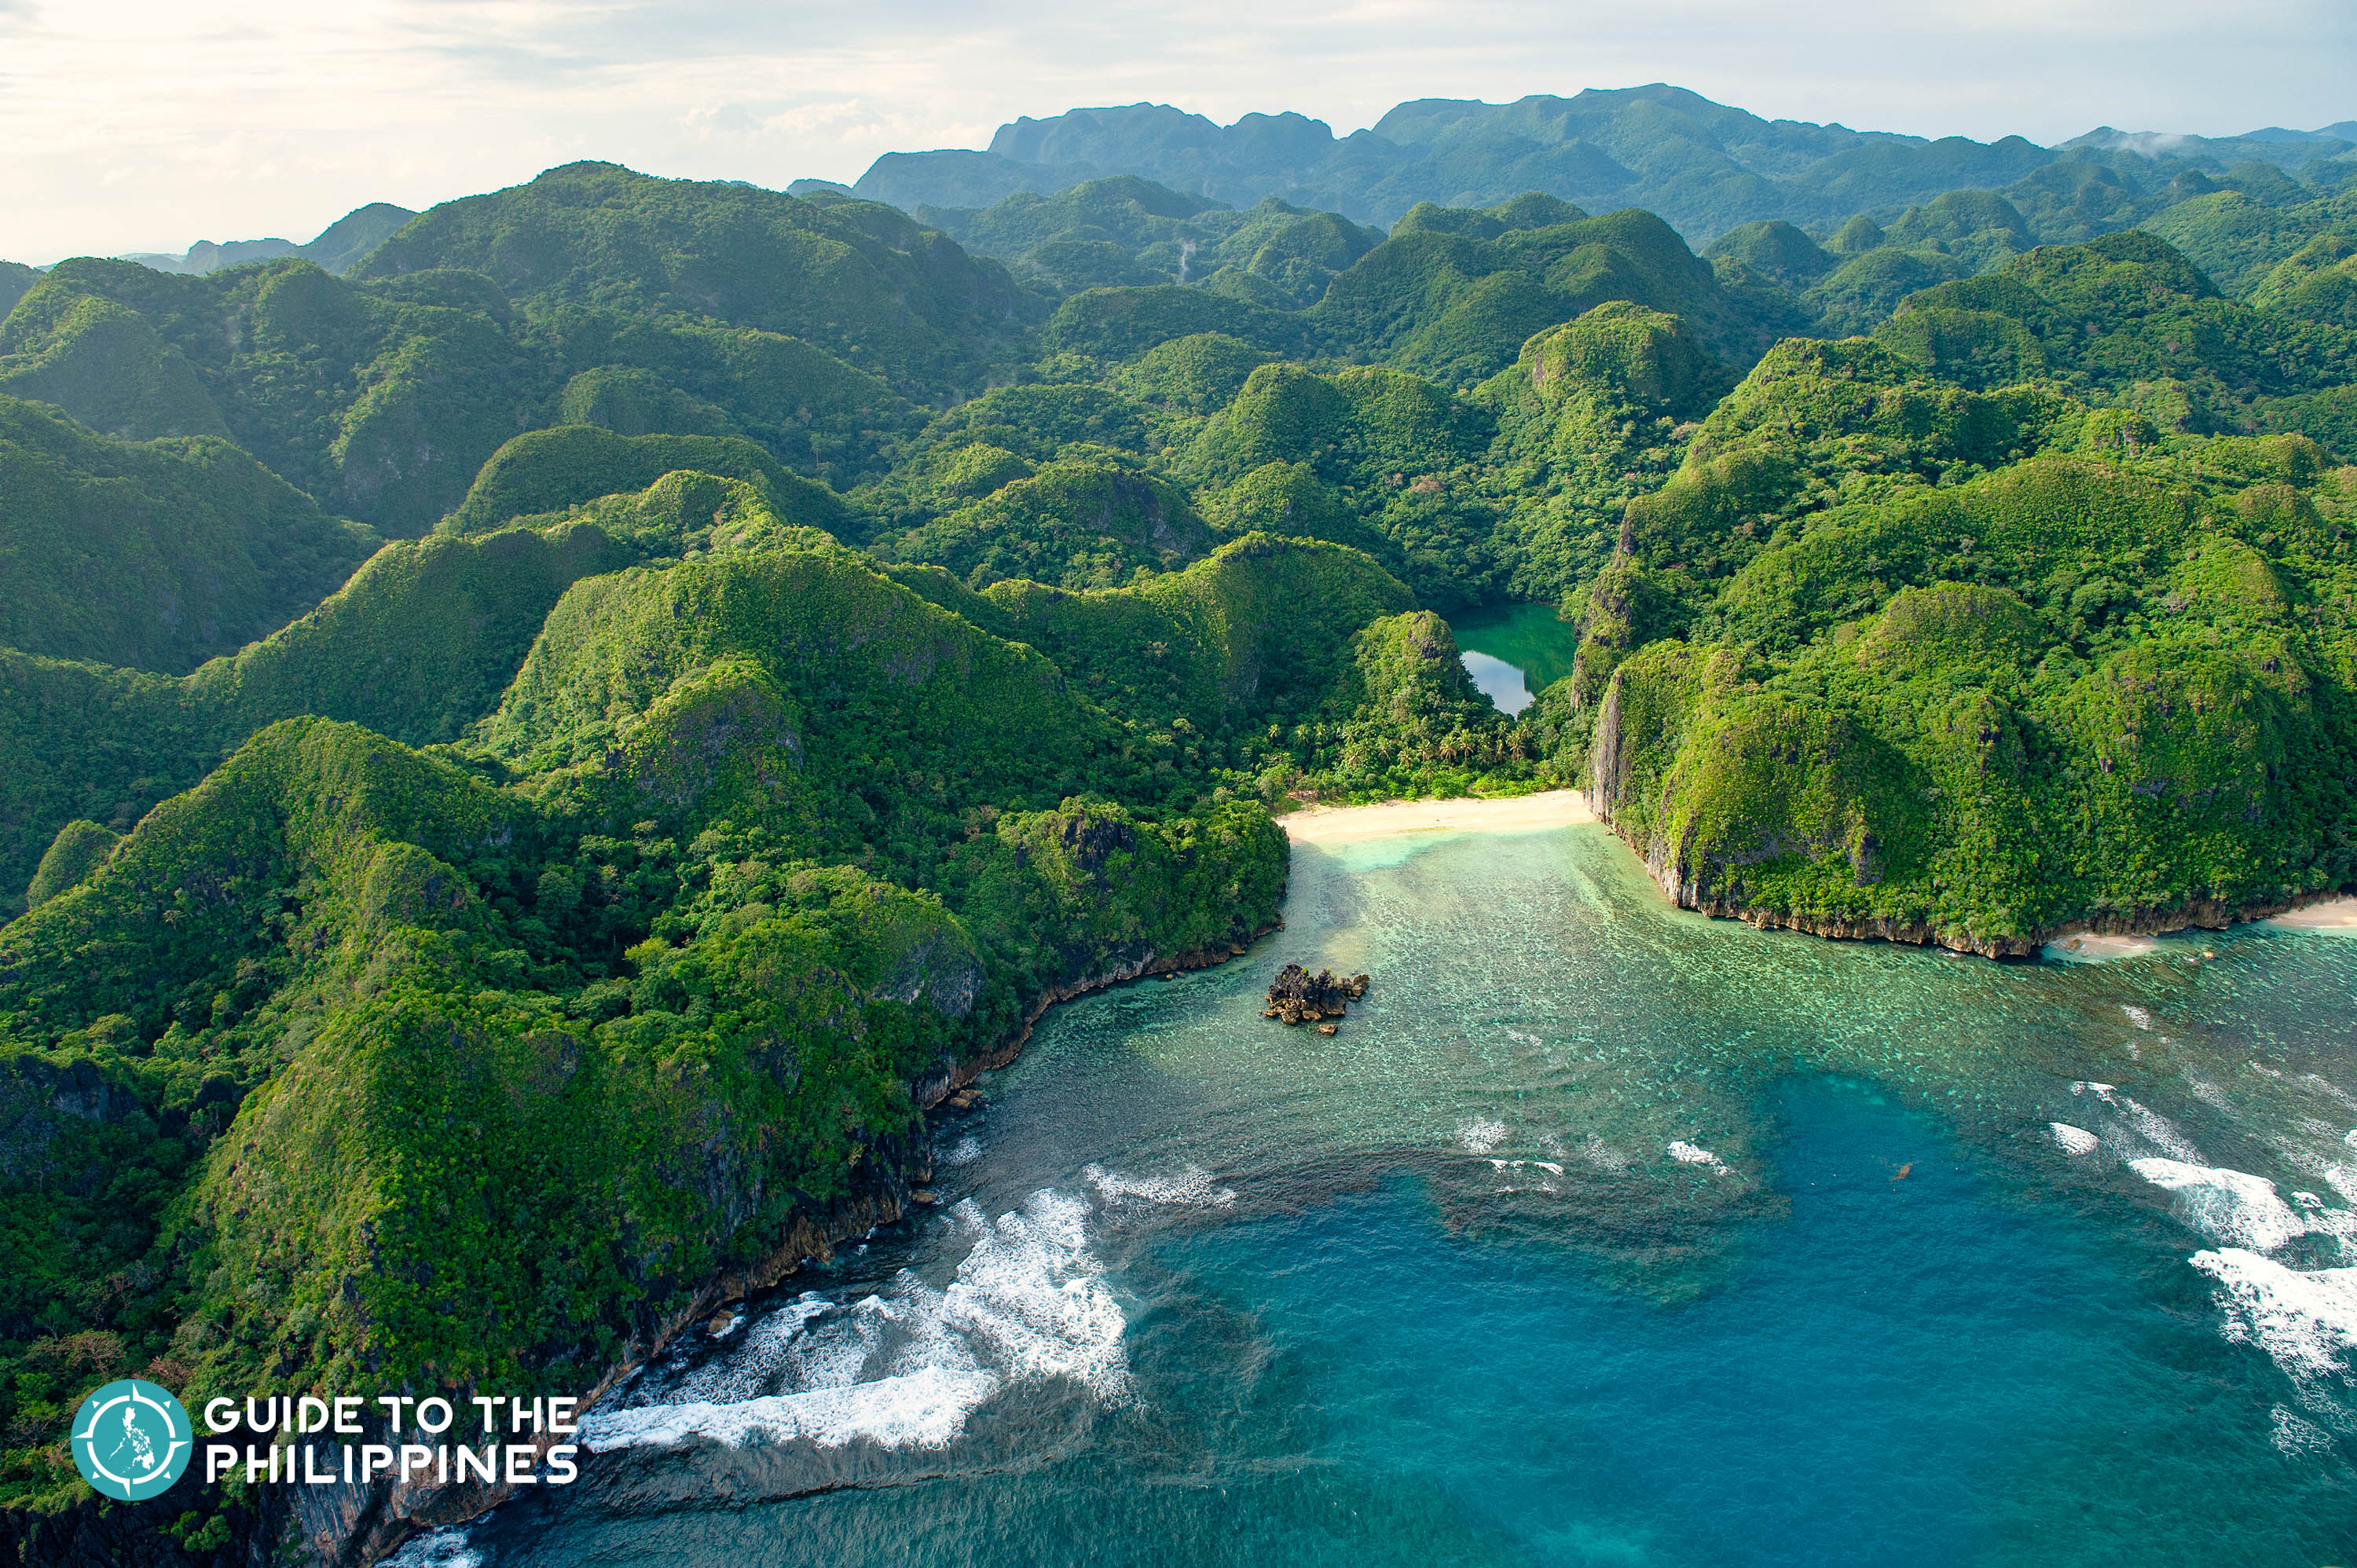 Philippines Travel Guide: Everything You Need to Know